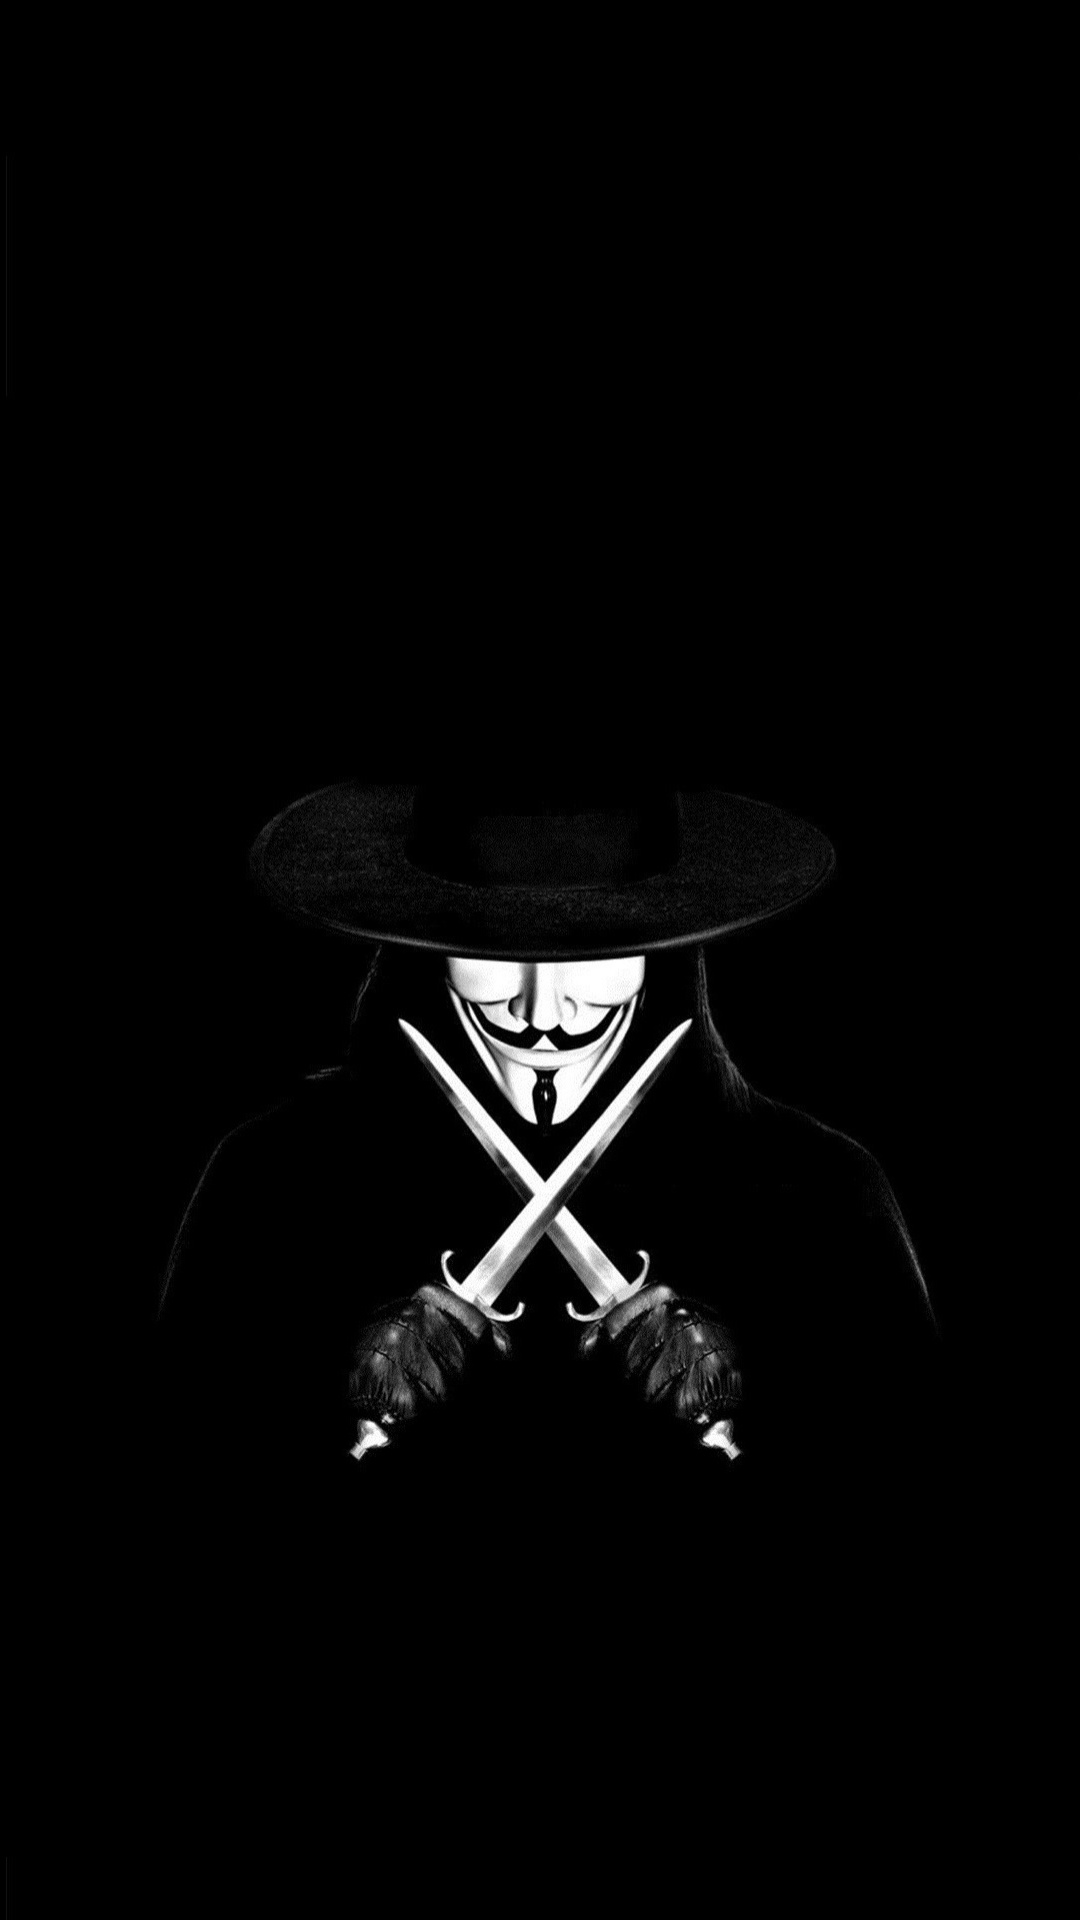 Anonymous Mask Wallpapers  Top Best 30 Anonymous Mask Backgrounds